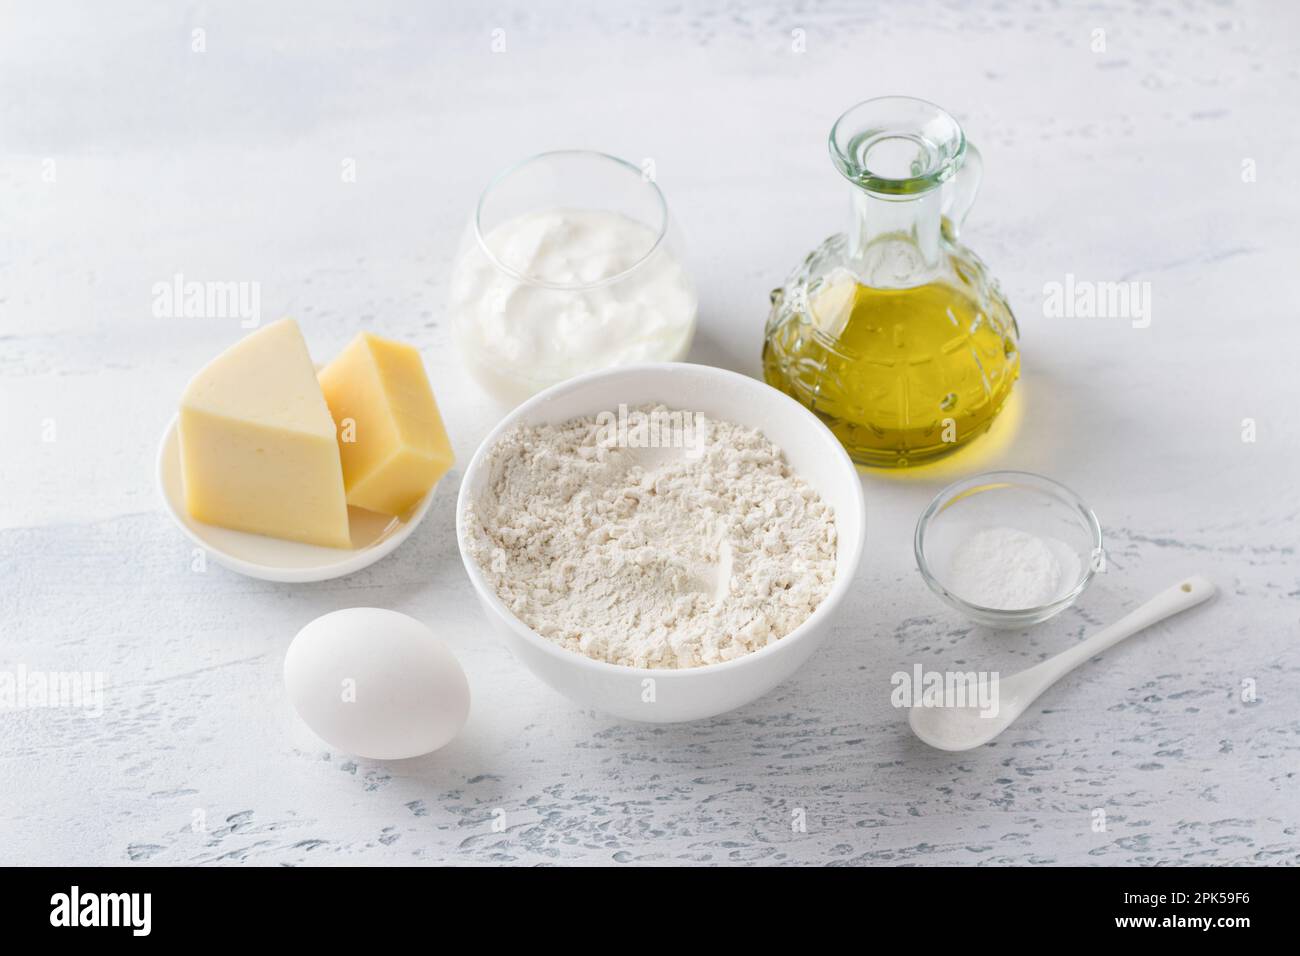 Ingredients for cooking traditional Italian biscotti cheese croutons: wheat flour, natural yogurt, egg, hard cheese, olive oil, salt and baking powder Stock Photo